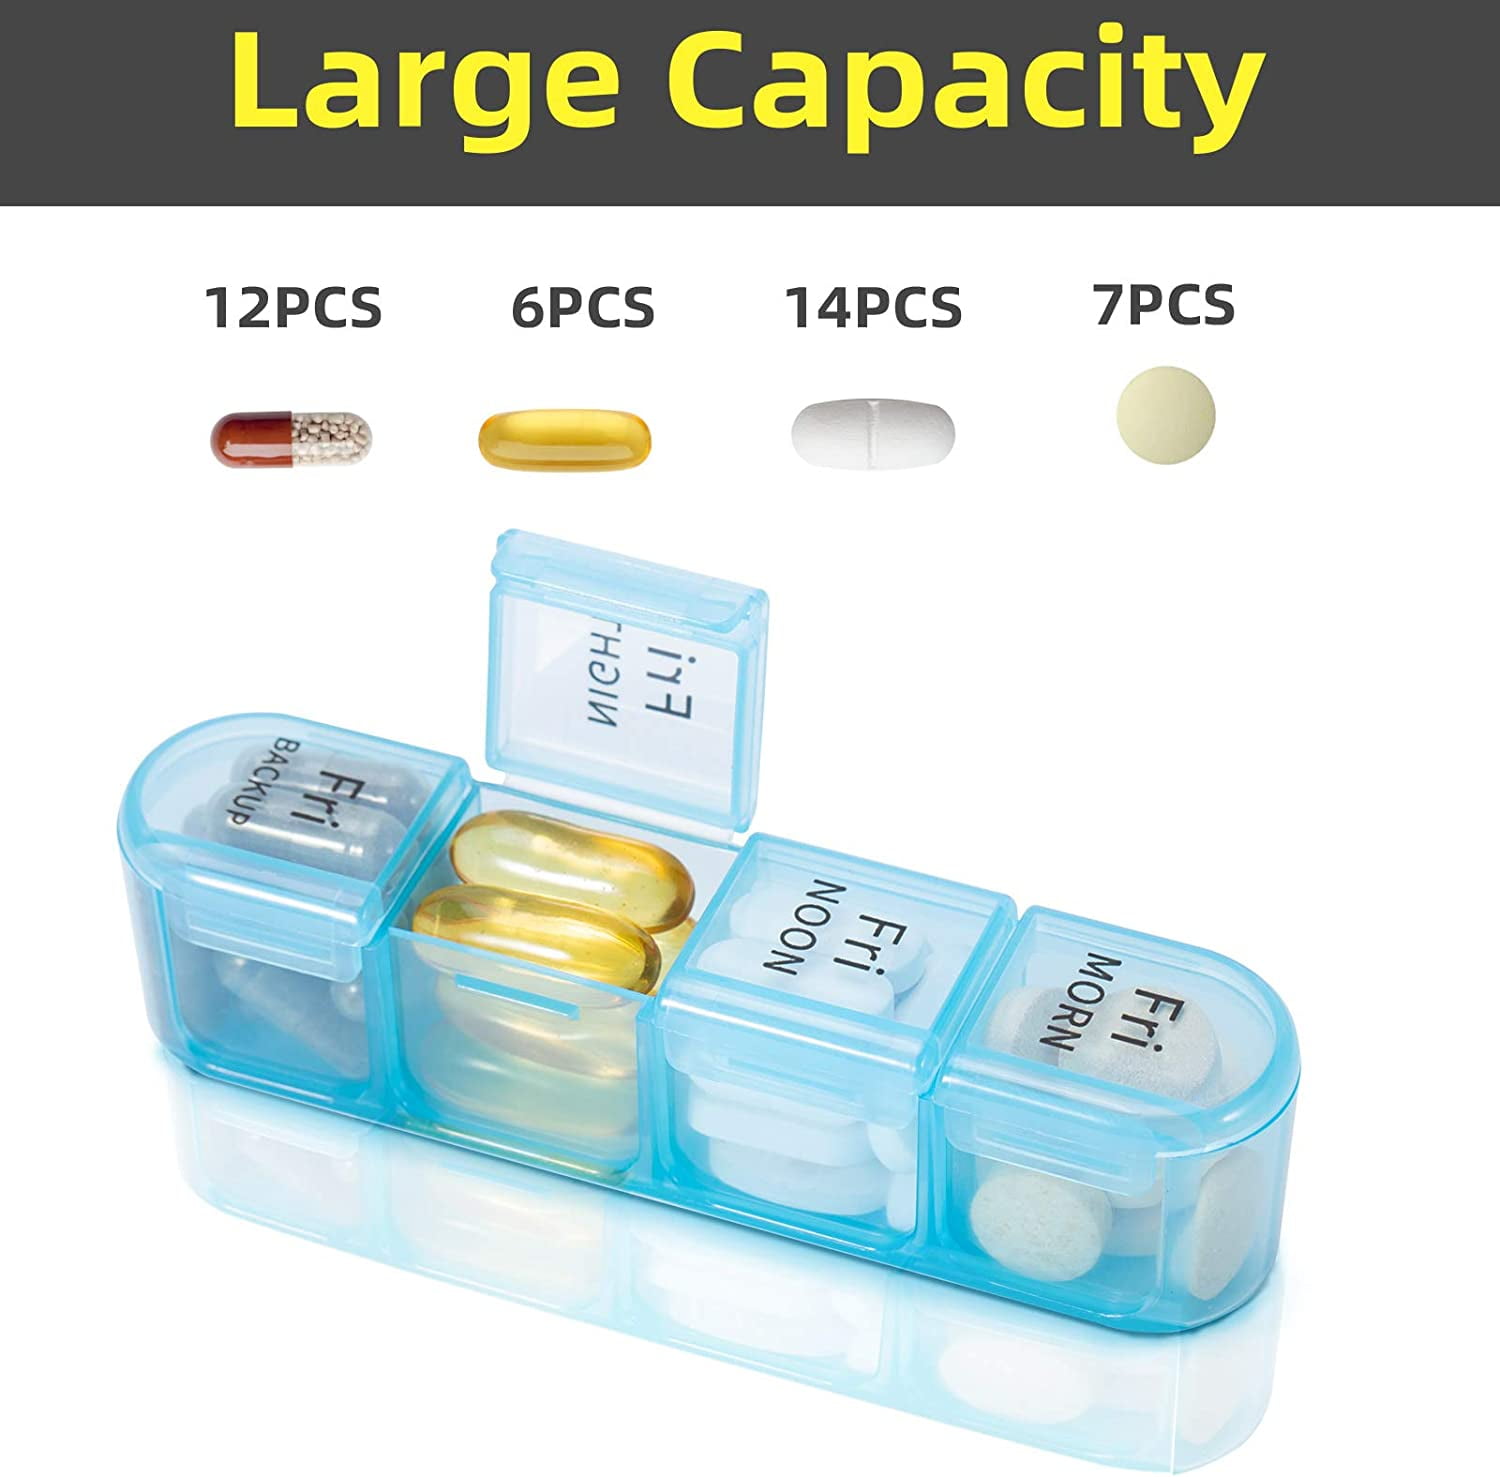 Anself Portable Pill Organizer Storage Box Weekly Prescription and Medication Case 7 Days 4 Times A Day Morning Noon Afternoon Night 28 Slots